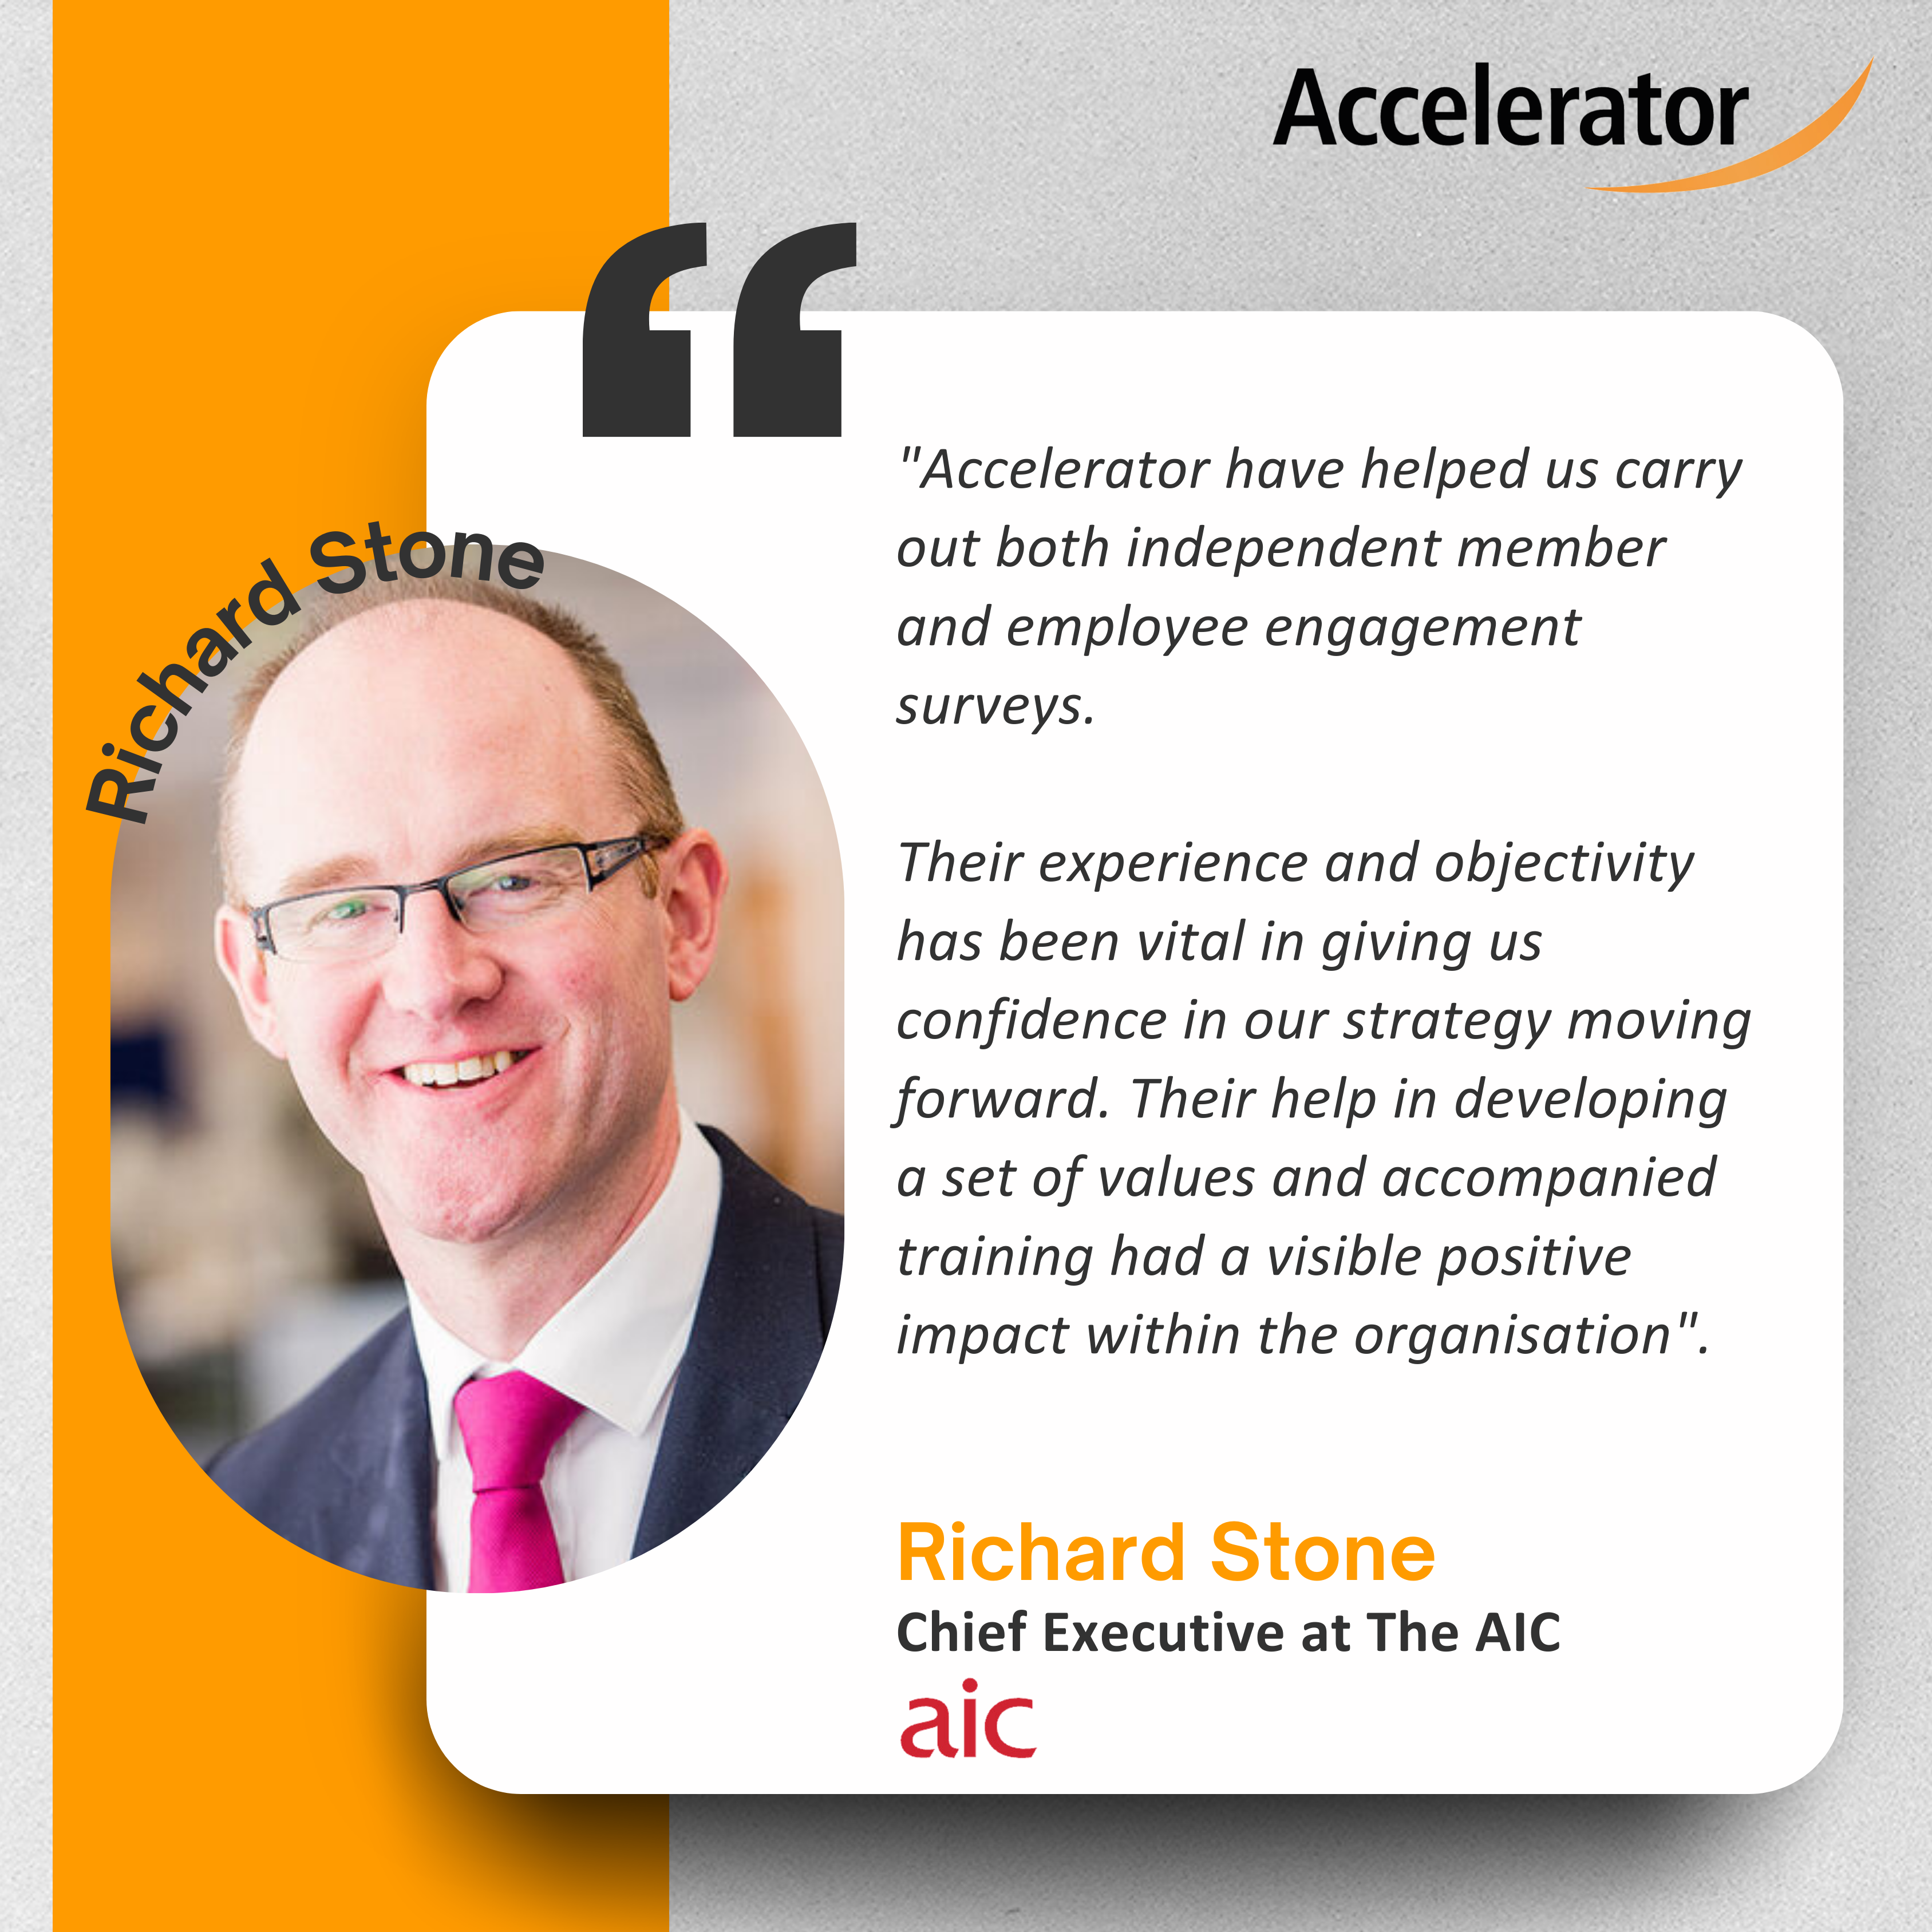 Positive Feedback received from Richard Stone & the AIC